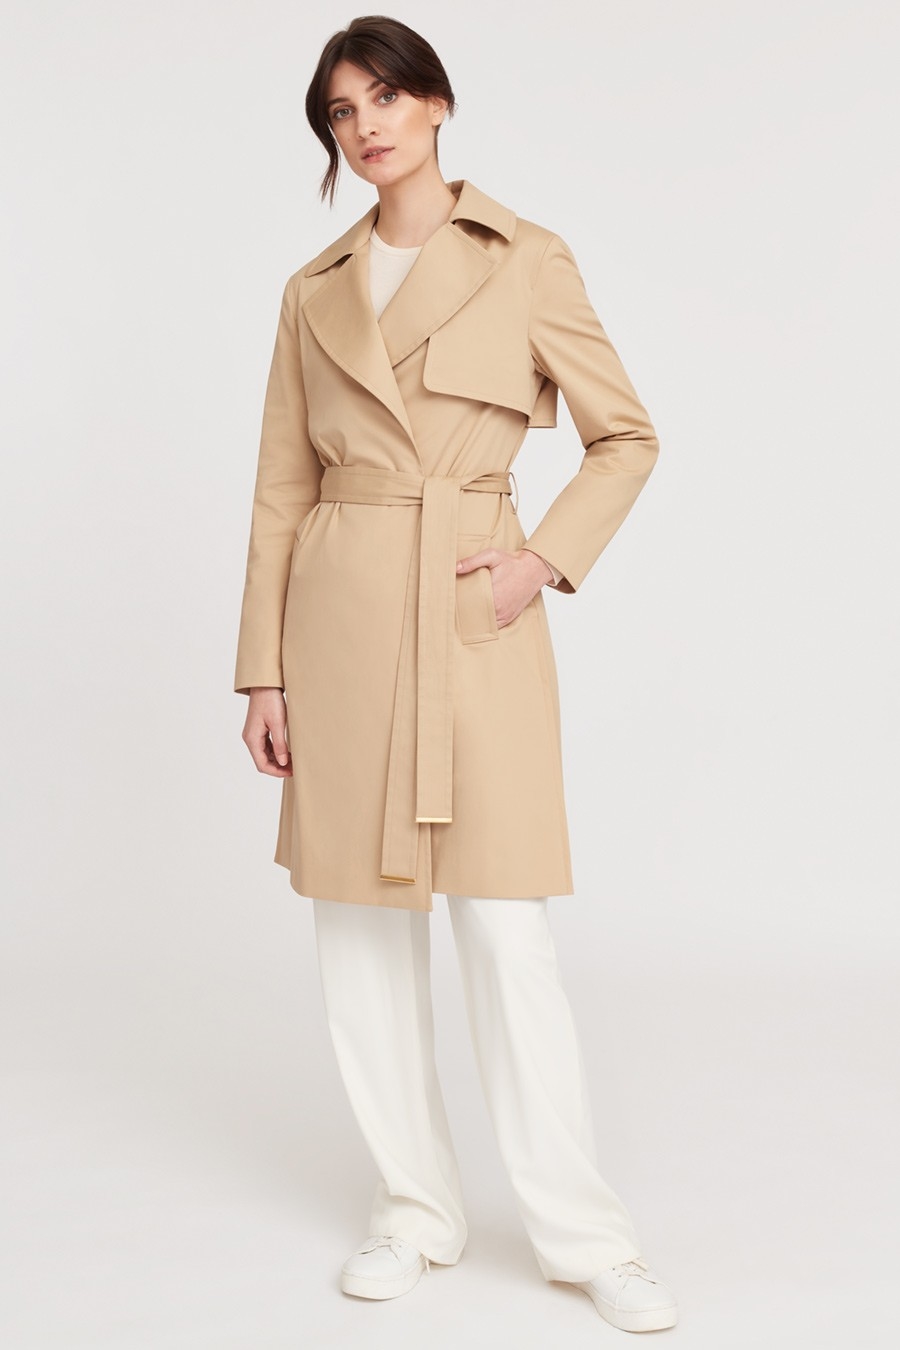 cuyana-classic-trench-wheat - The Cool Mom Co.